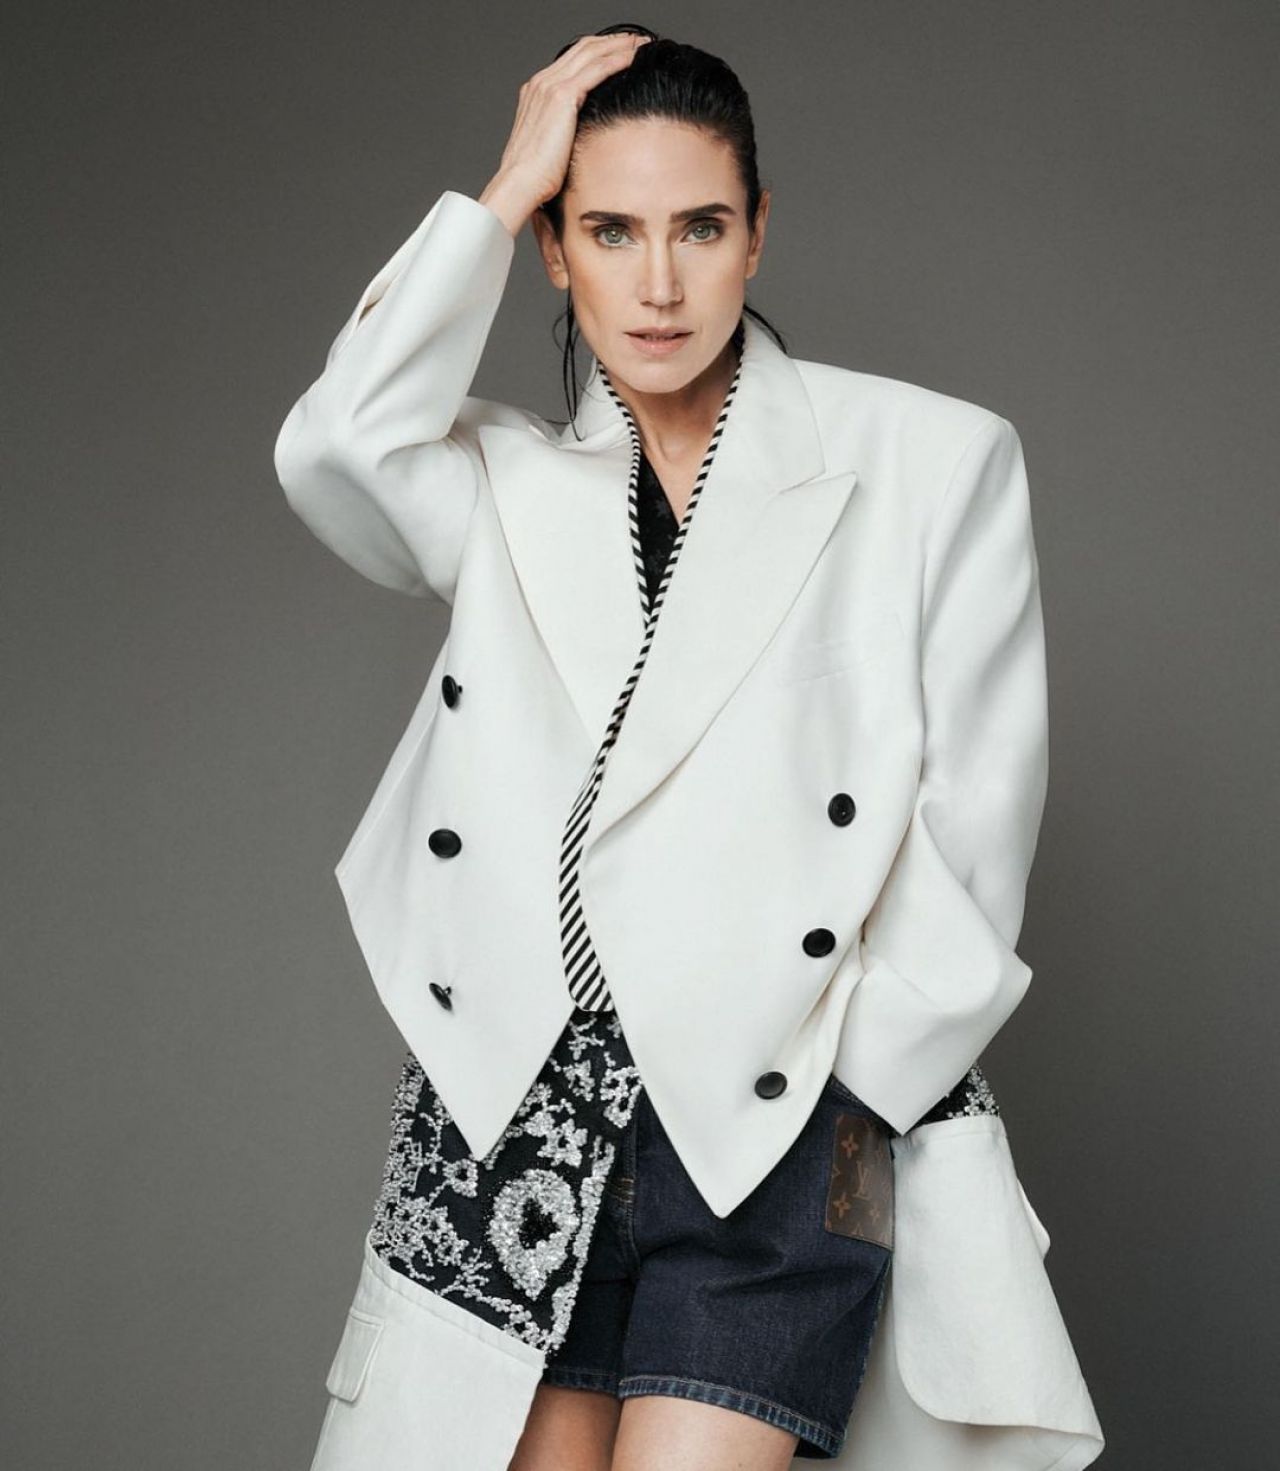 Jennifer Connelly Style, Clothes, Outfits and Fashion • CelebMafia